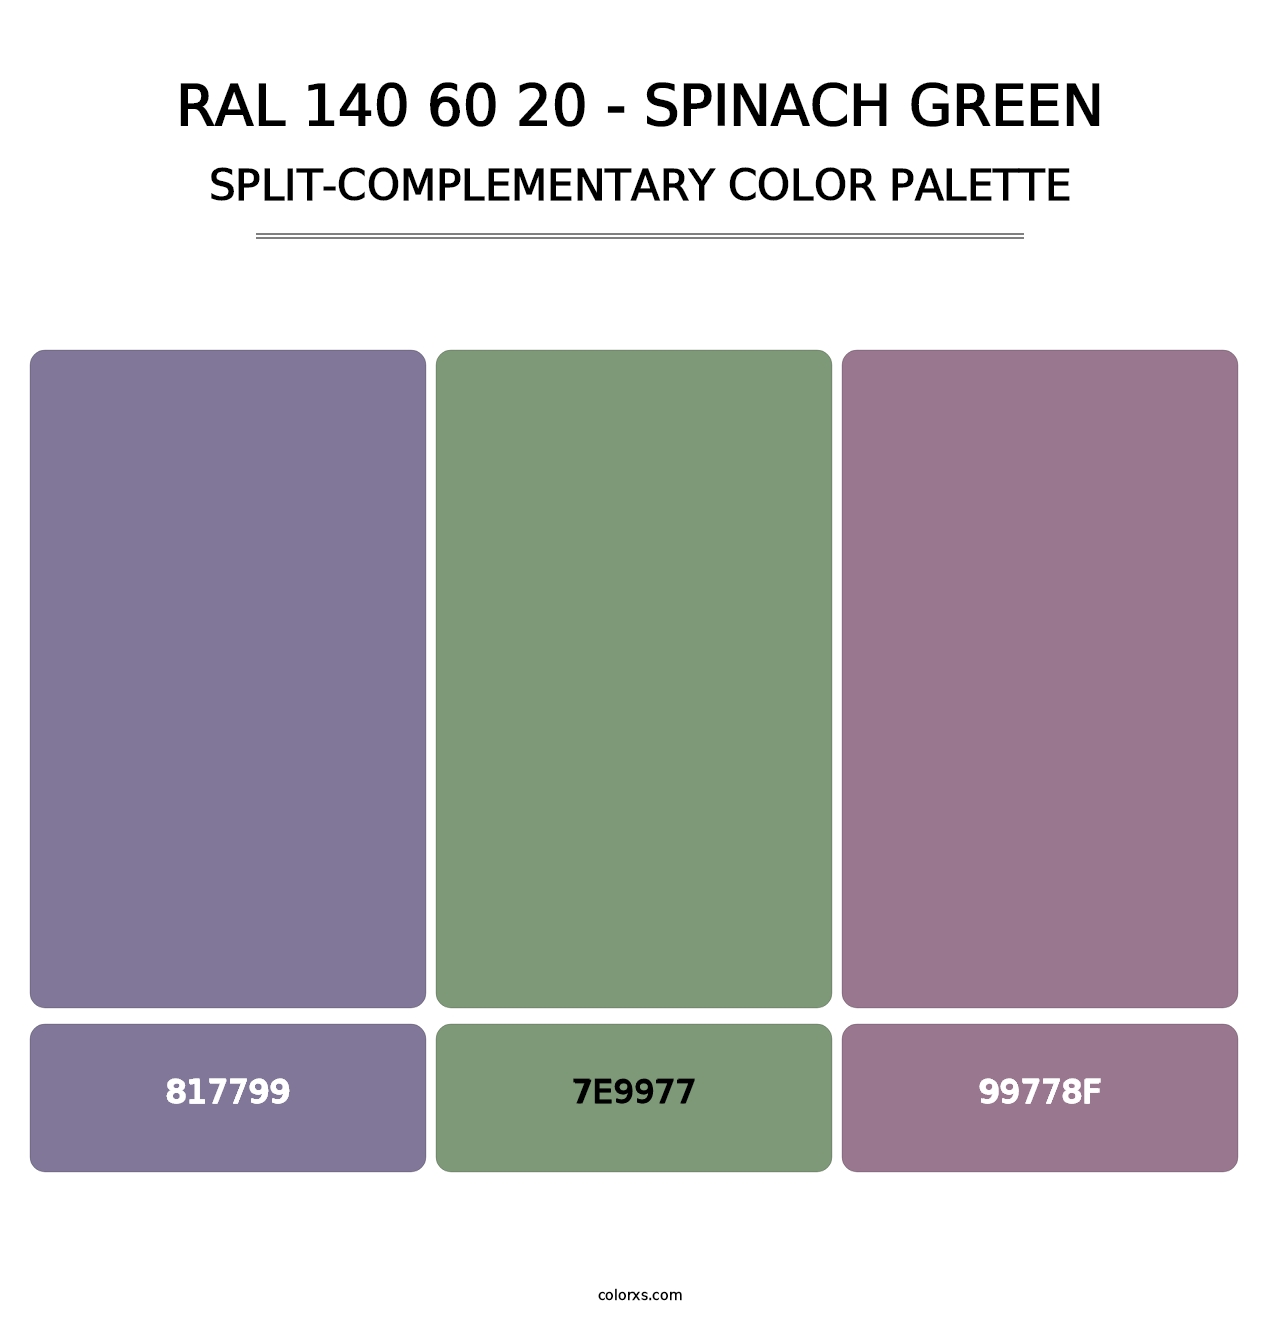 RAL 140 60 20 - Spinach Green - Split-Complementary Color Palette